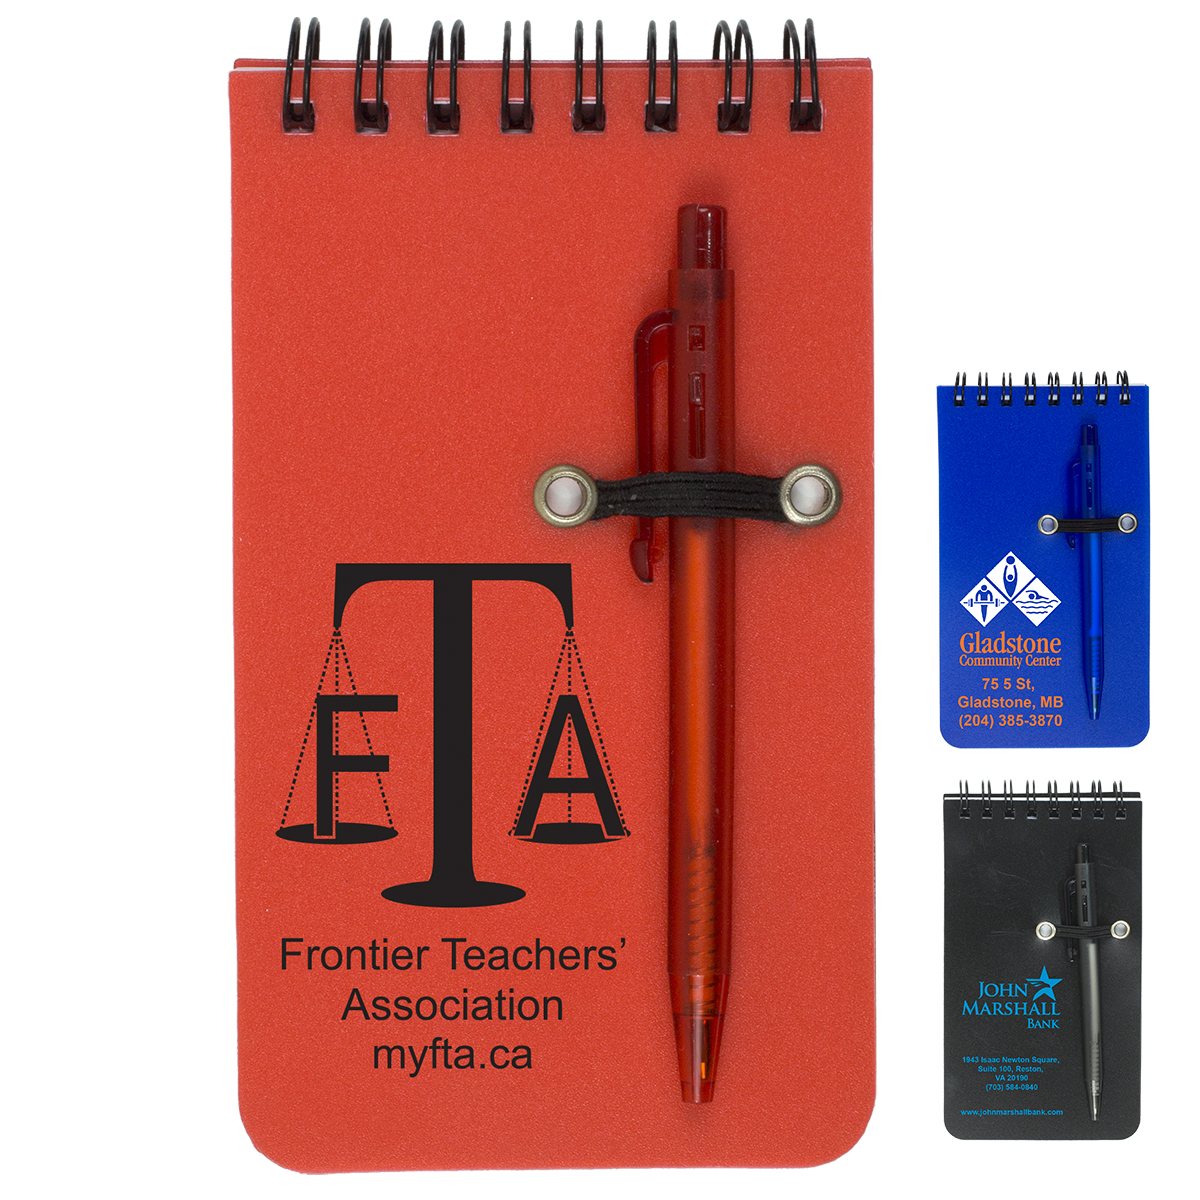 "MONTEREY" Pocket Sized Spiral Jotter Notepad Notebook with Pen